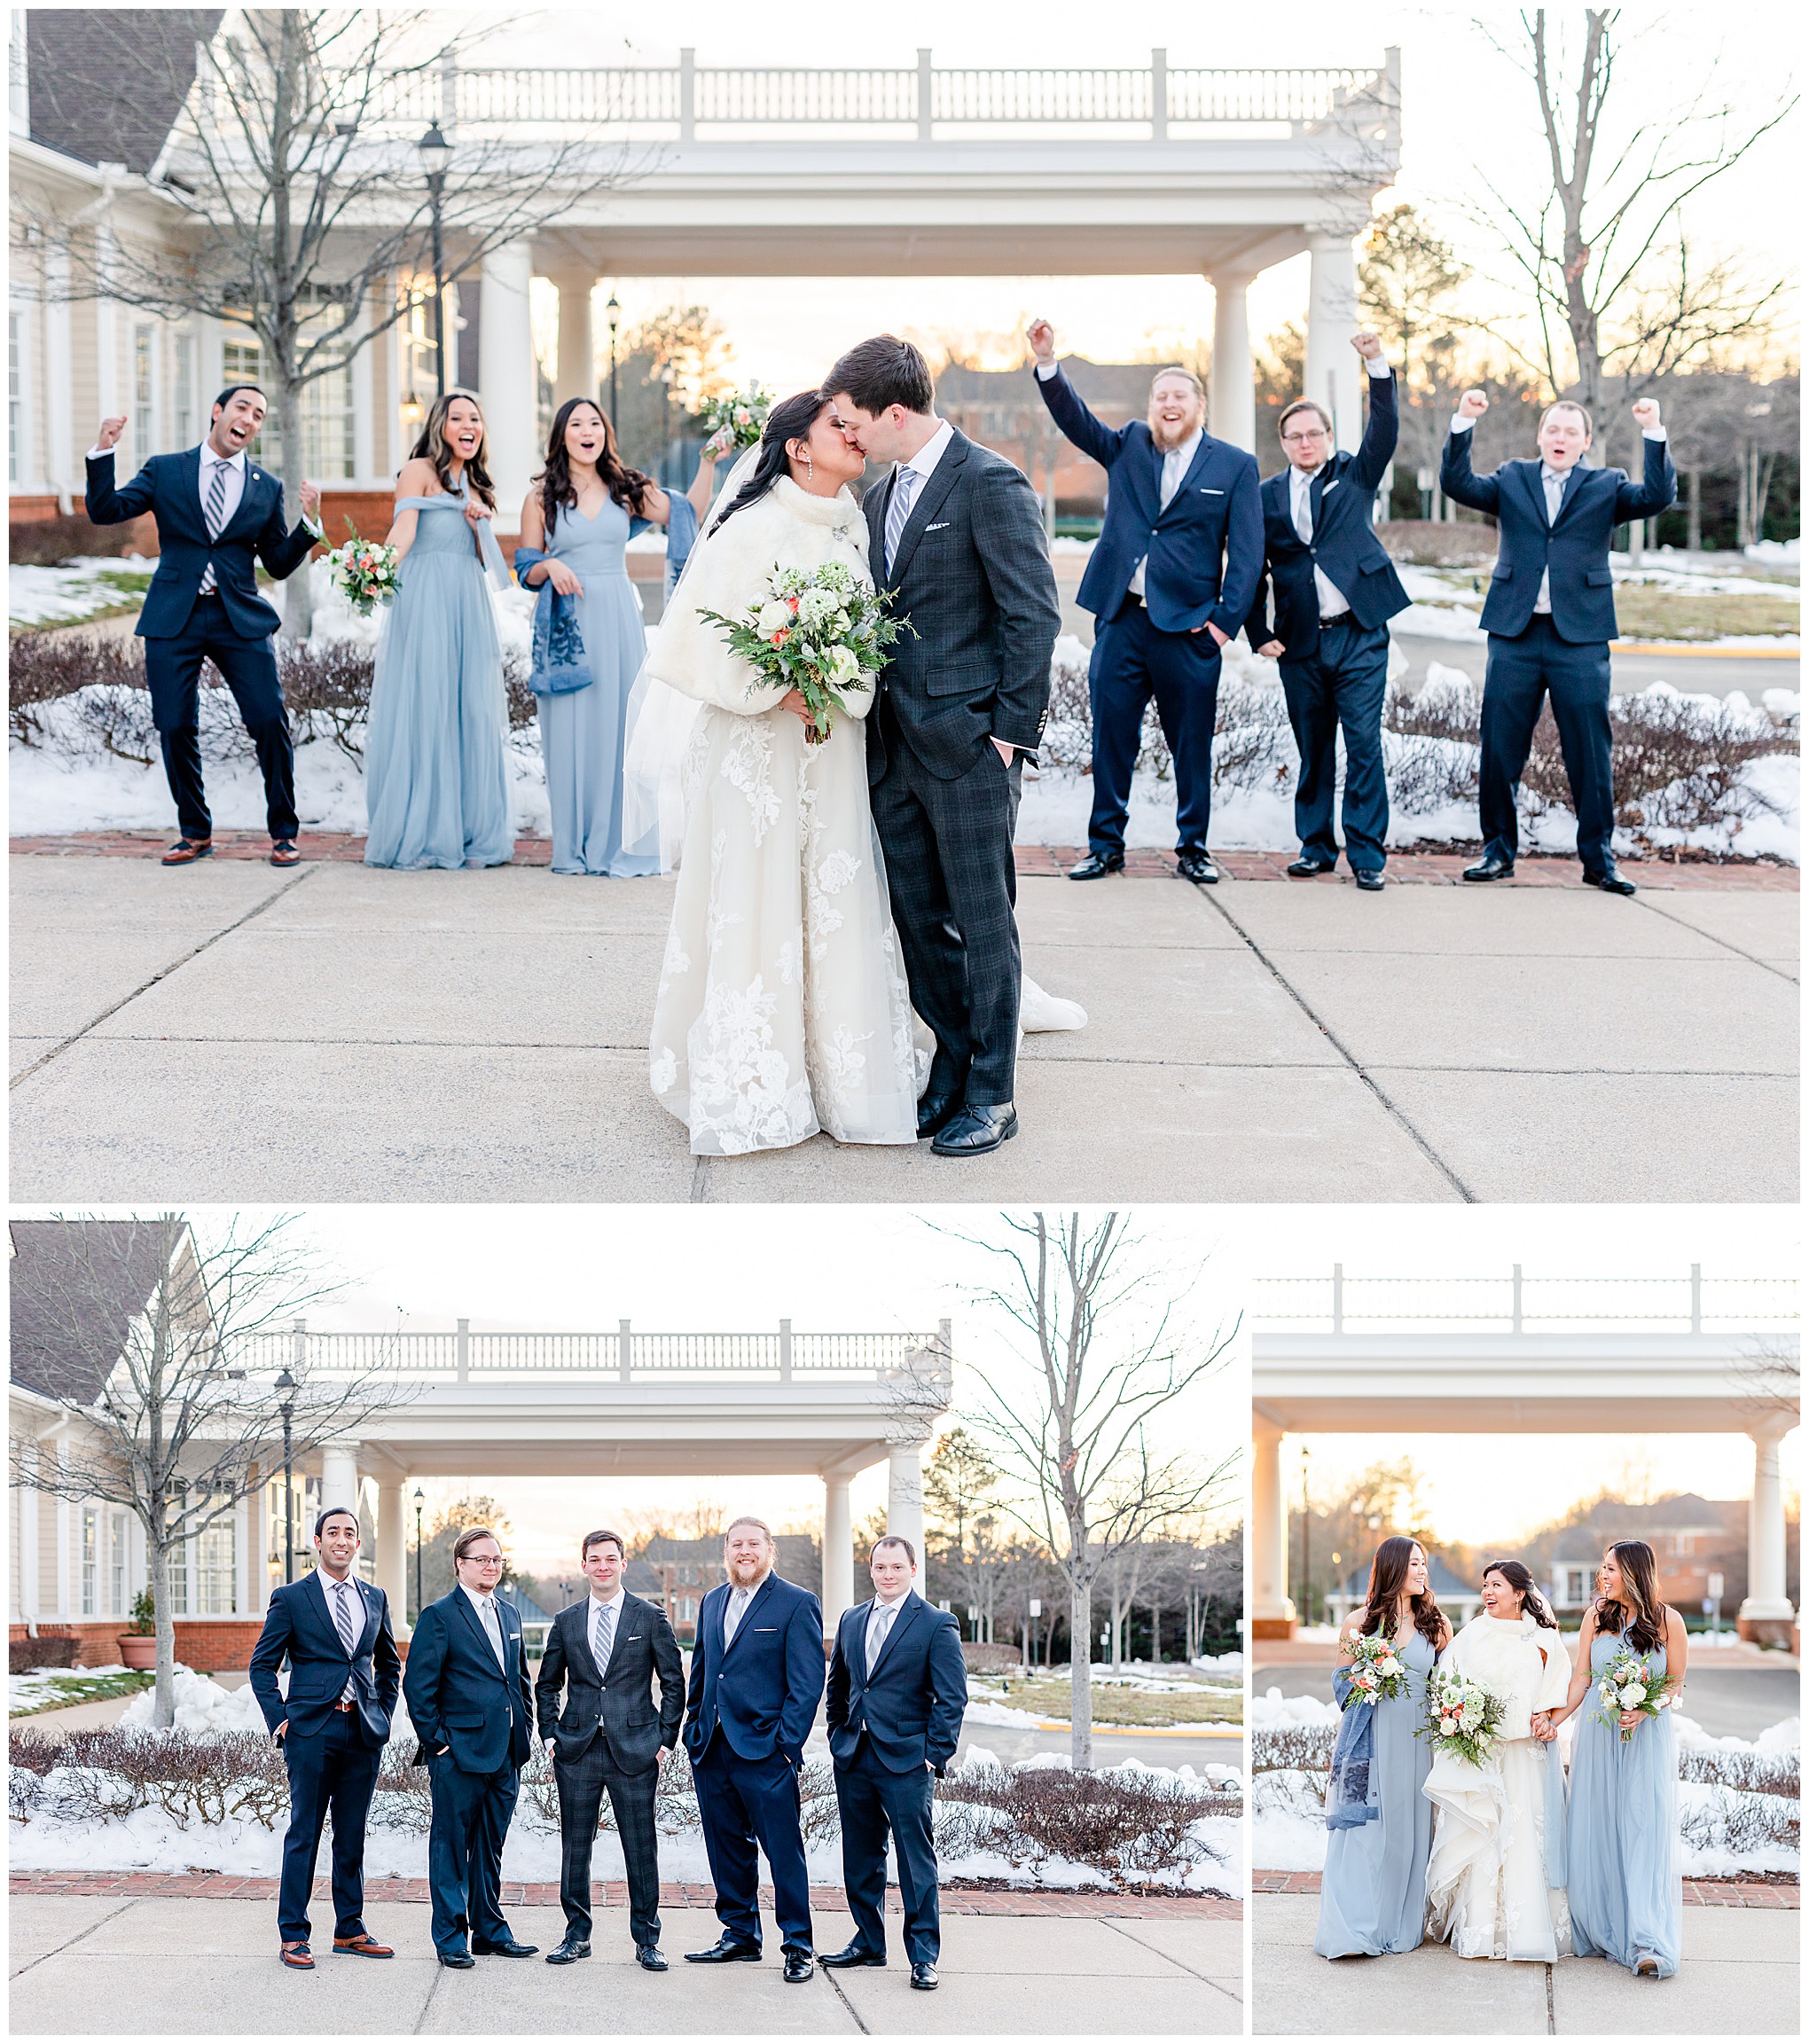 Regency at Dominion Valley wedding, Virginia country club wedding, Haymarket Virginia wedding, northern Virginia wedding, winter wedding, winter wedding aesthetic, DC micro wedding, northern Virginia wedding venues, classic winter wedding, Rachel E.H. Photography, bride and groom kissing in front of wedding party cheering